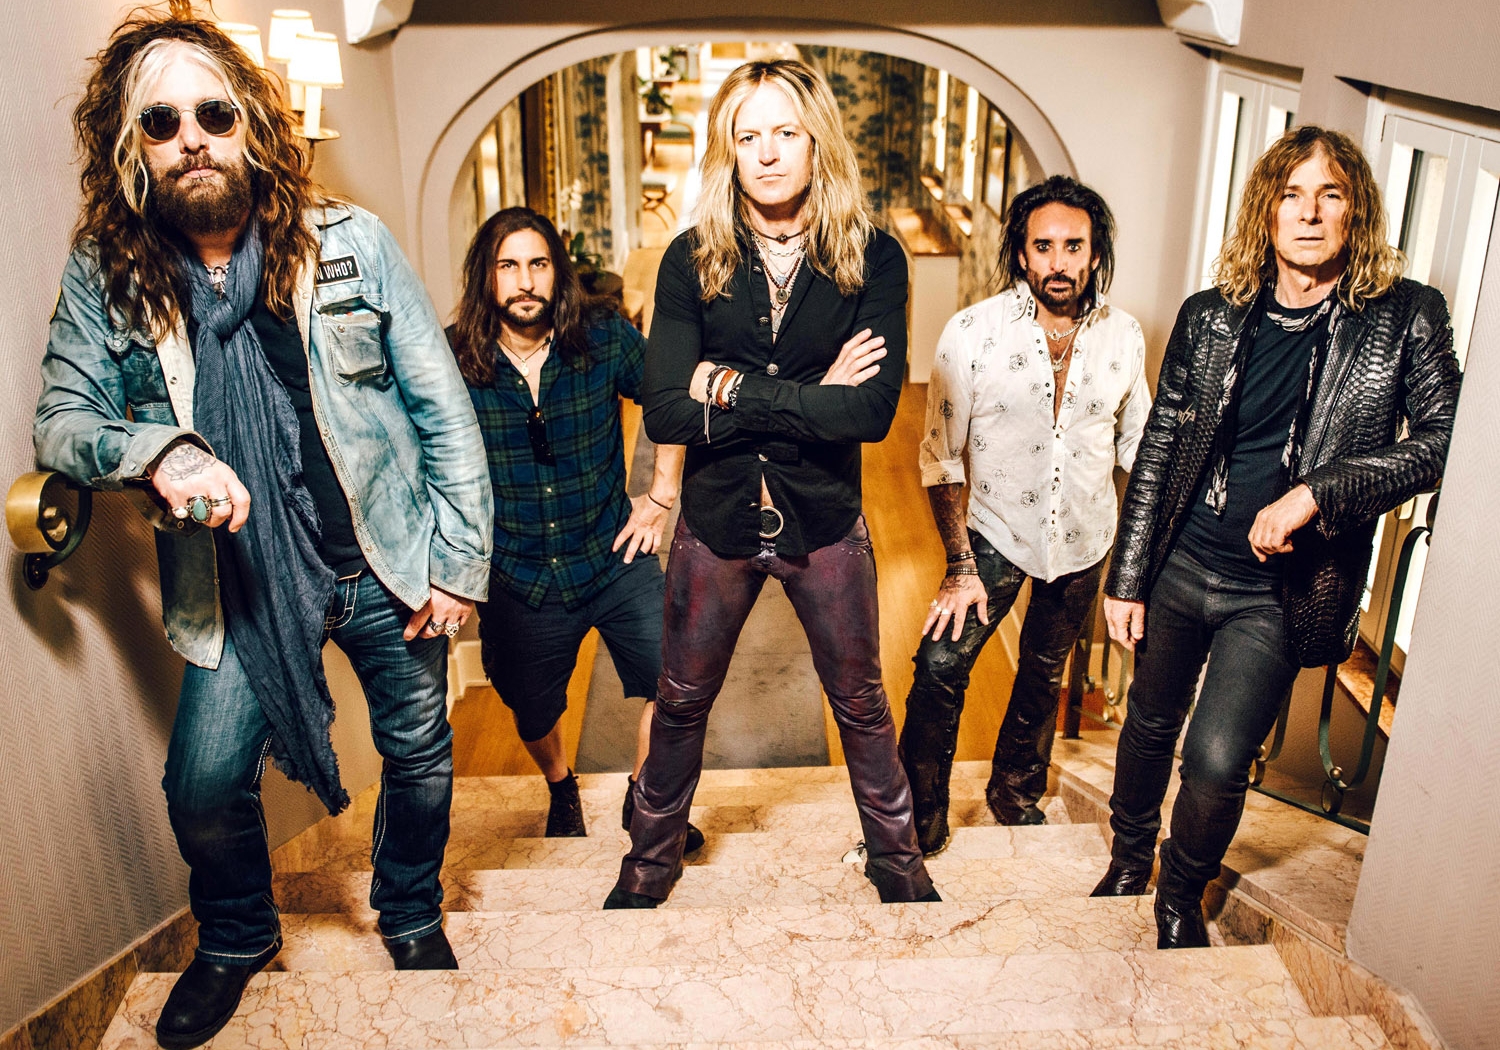 thedeaddaisies2016-groupshothires.jpg